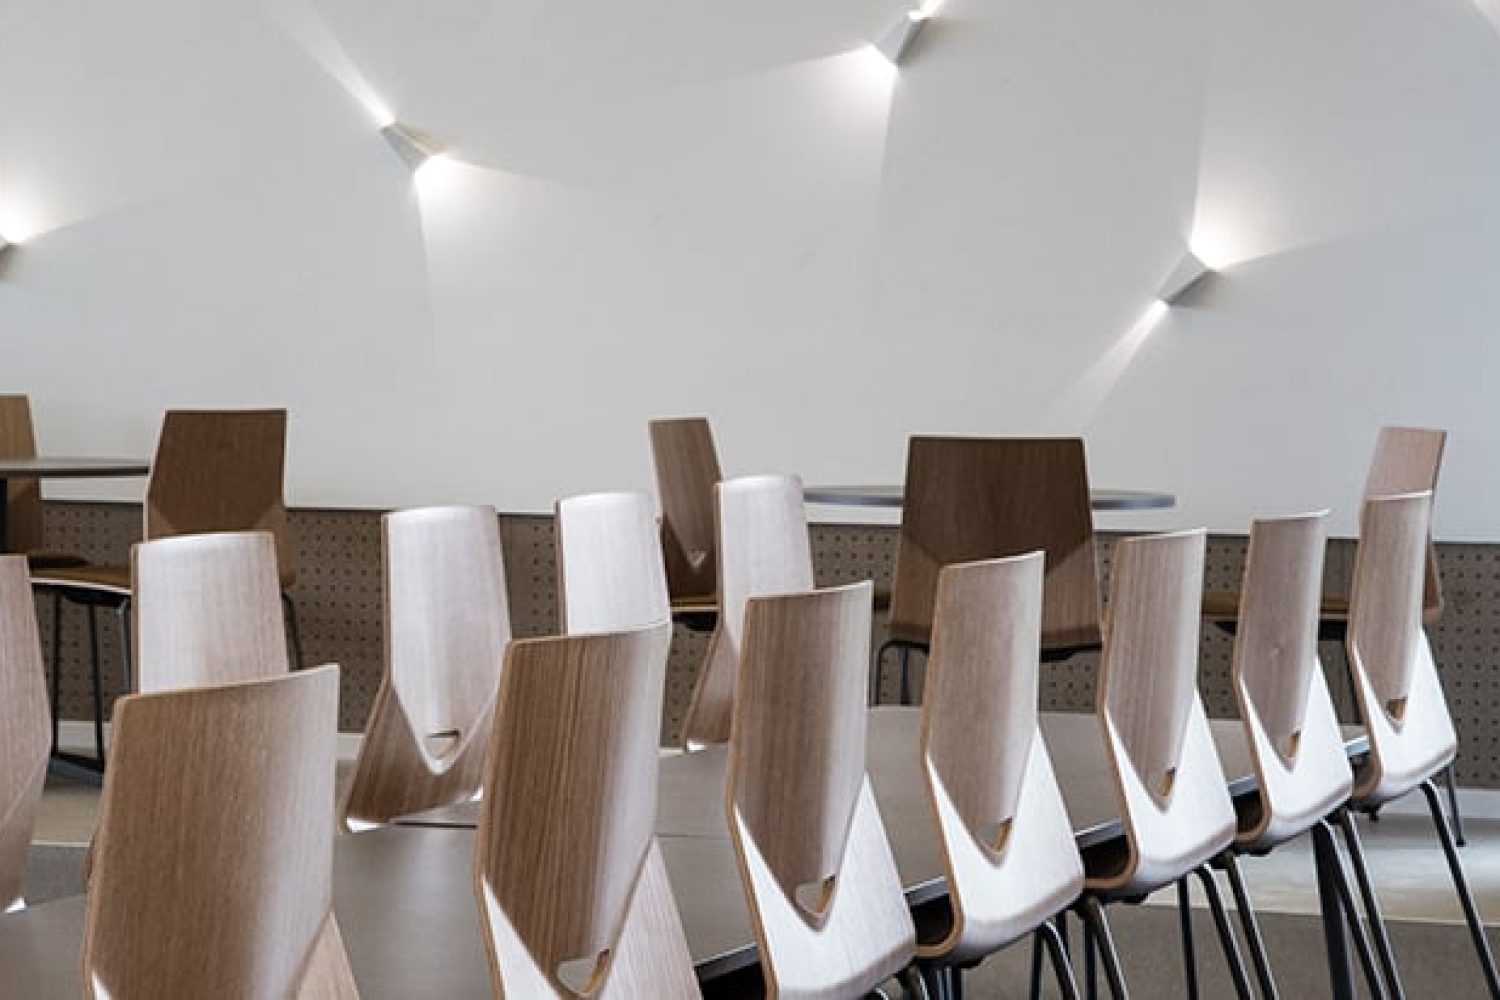 A row of wooden light weight office chairs in a conference room.